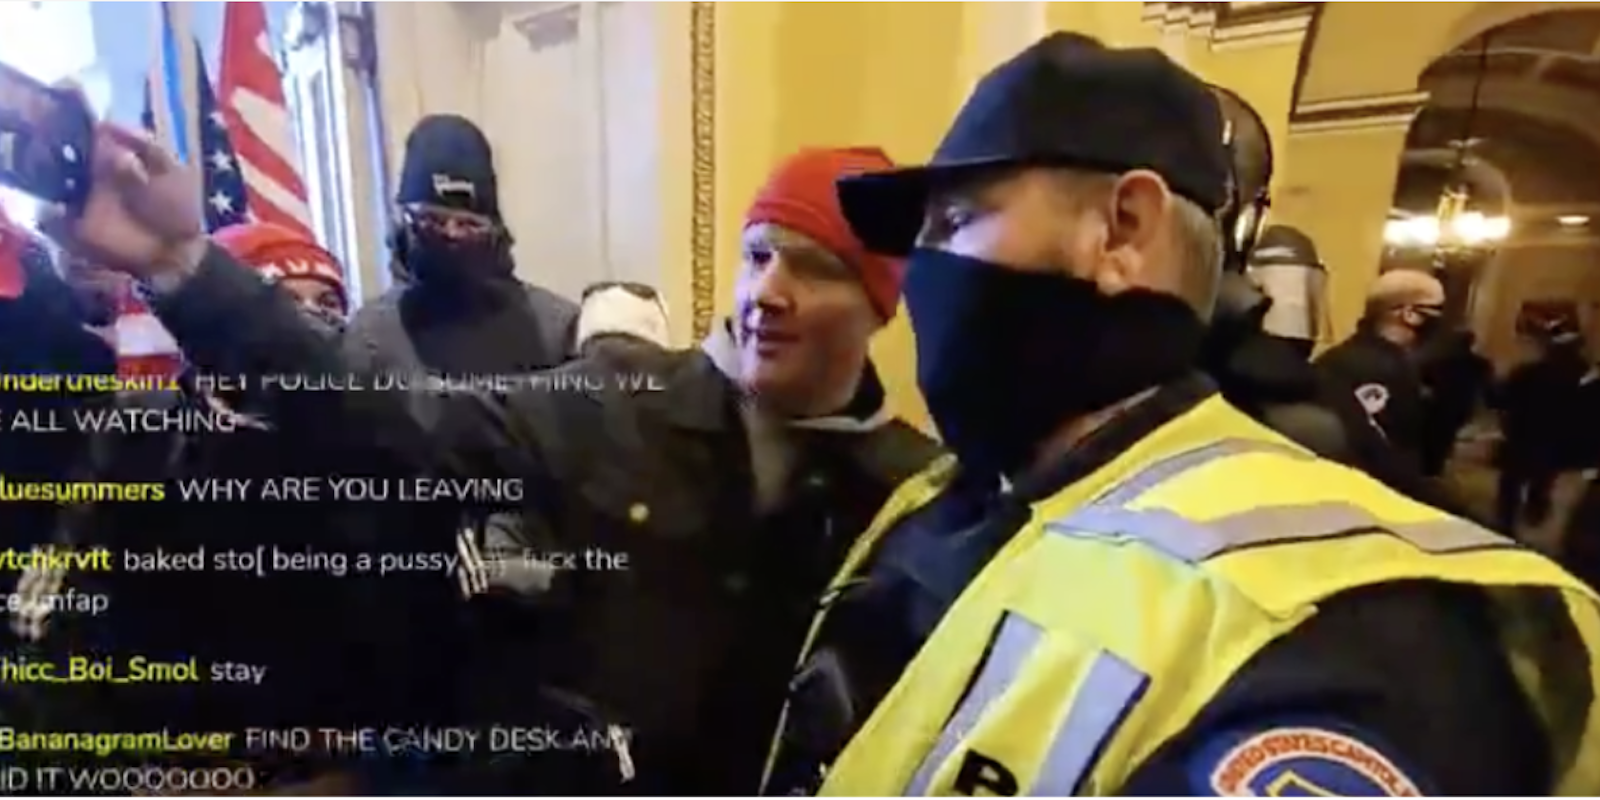 Cop poses for a selfie with Trump supporters on capitol hill during riots